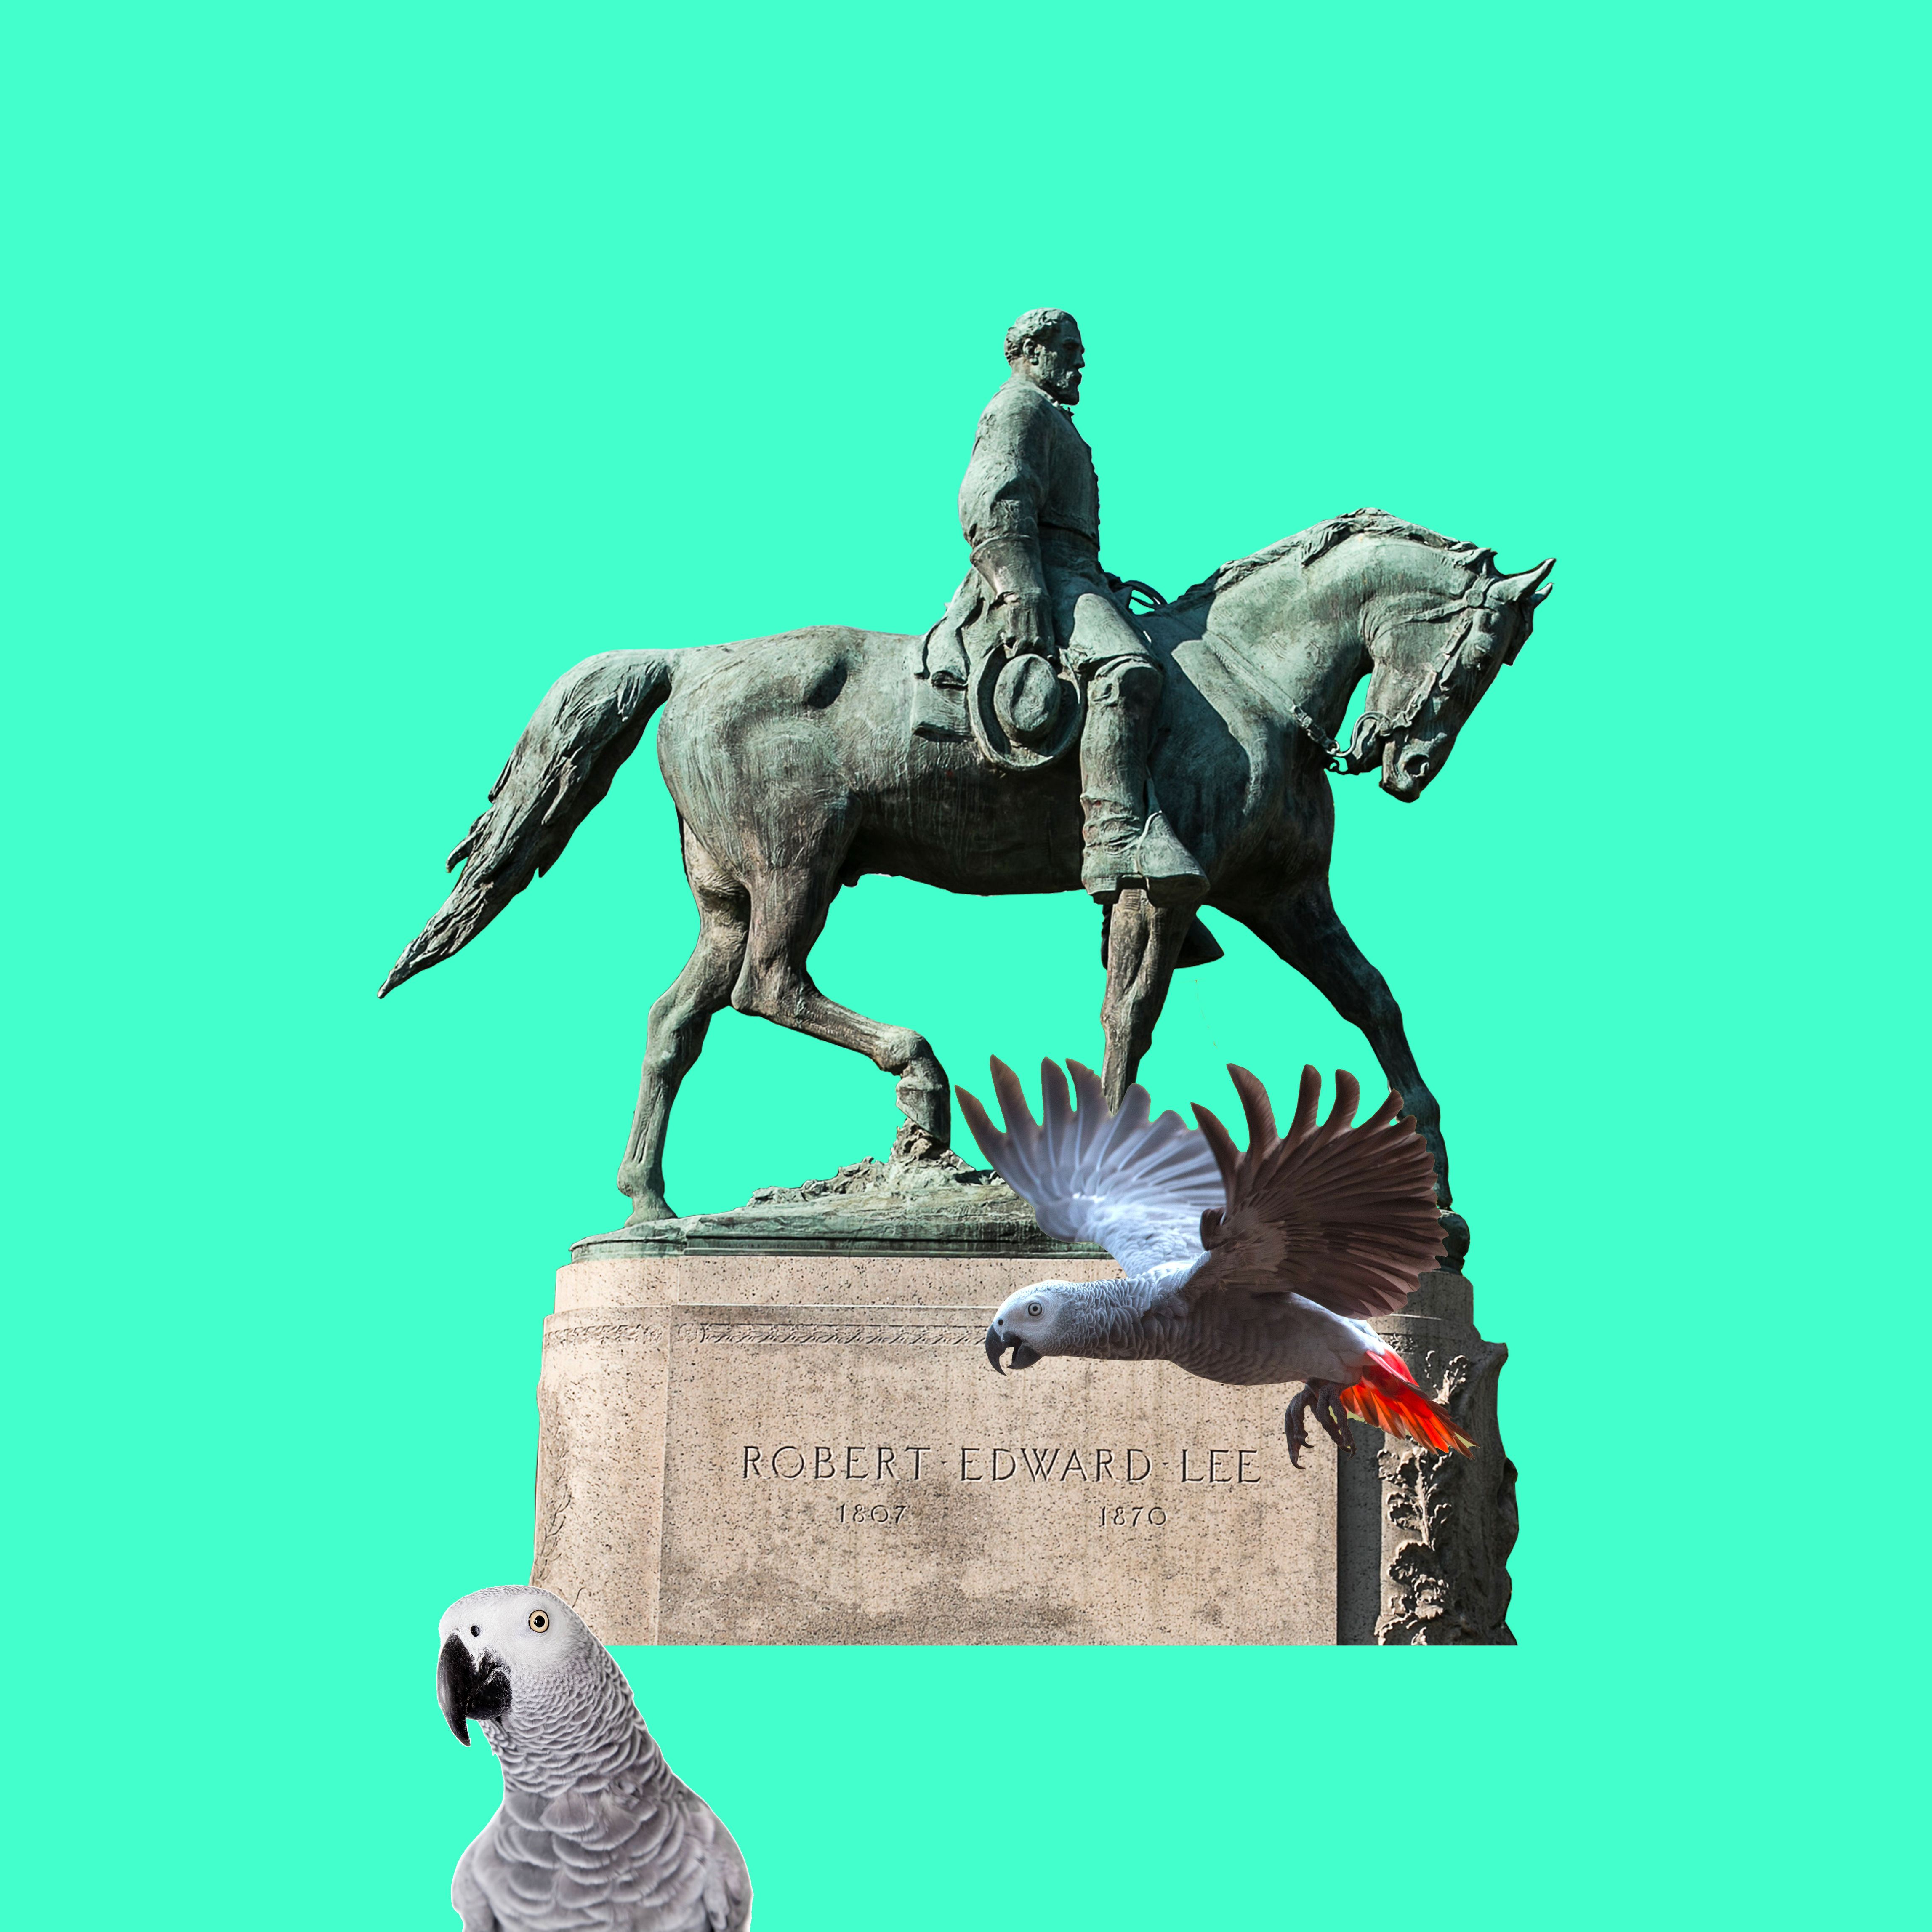 Robert Edward Lee Confederate monument on a bright turquoise background. Surrounding the monument are two grey parrots.